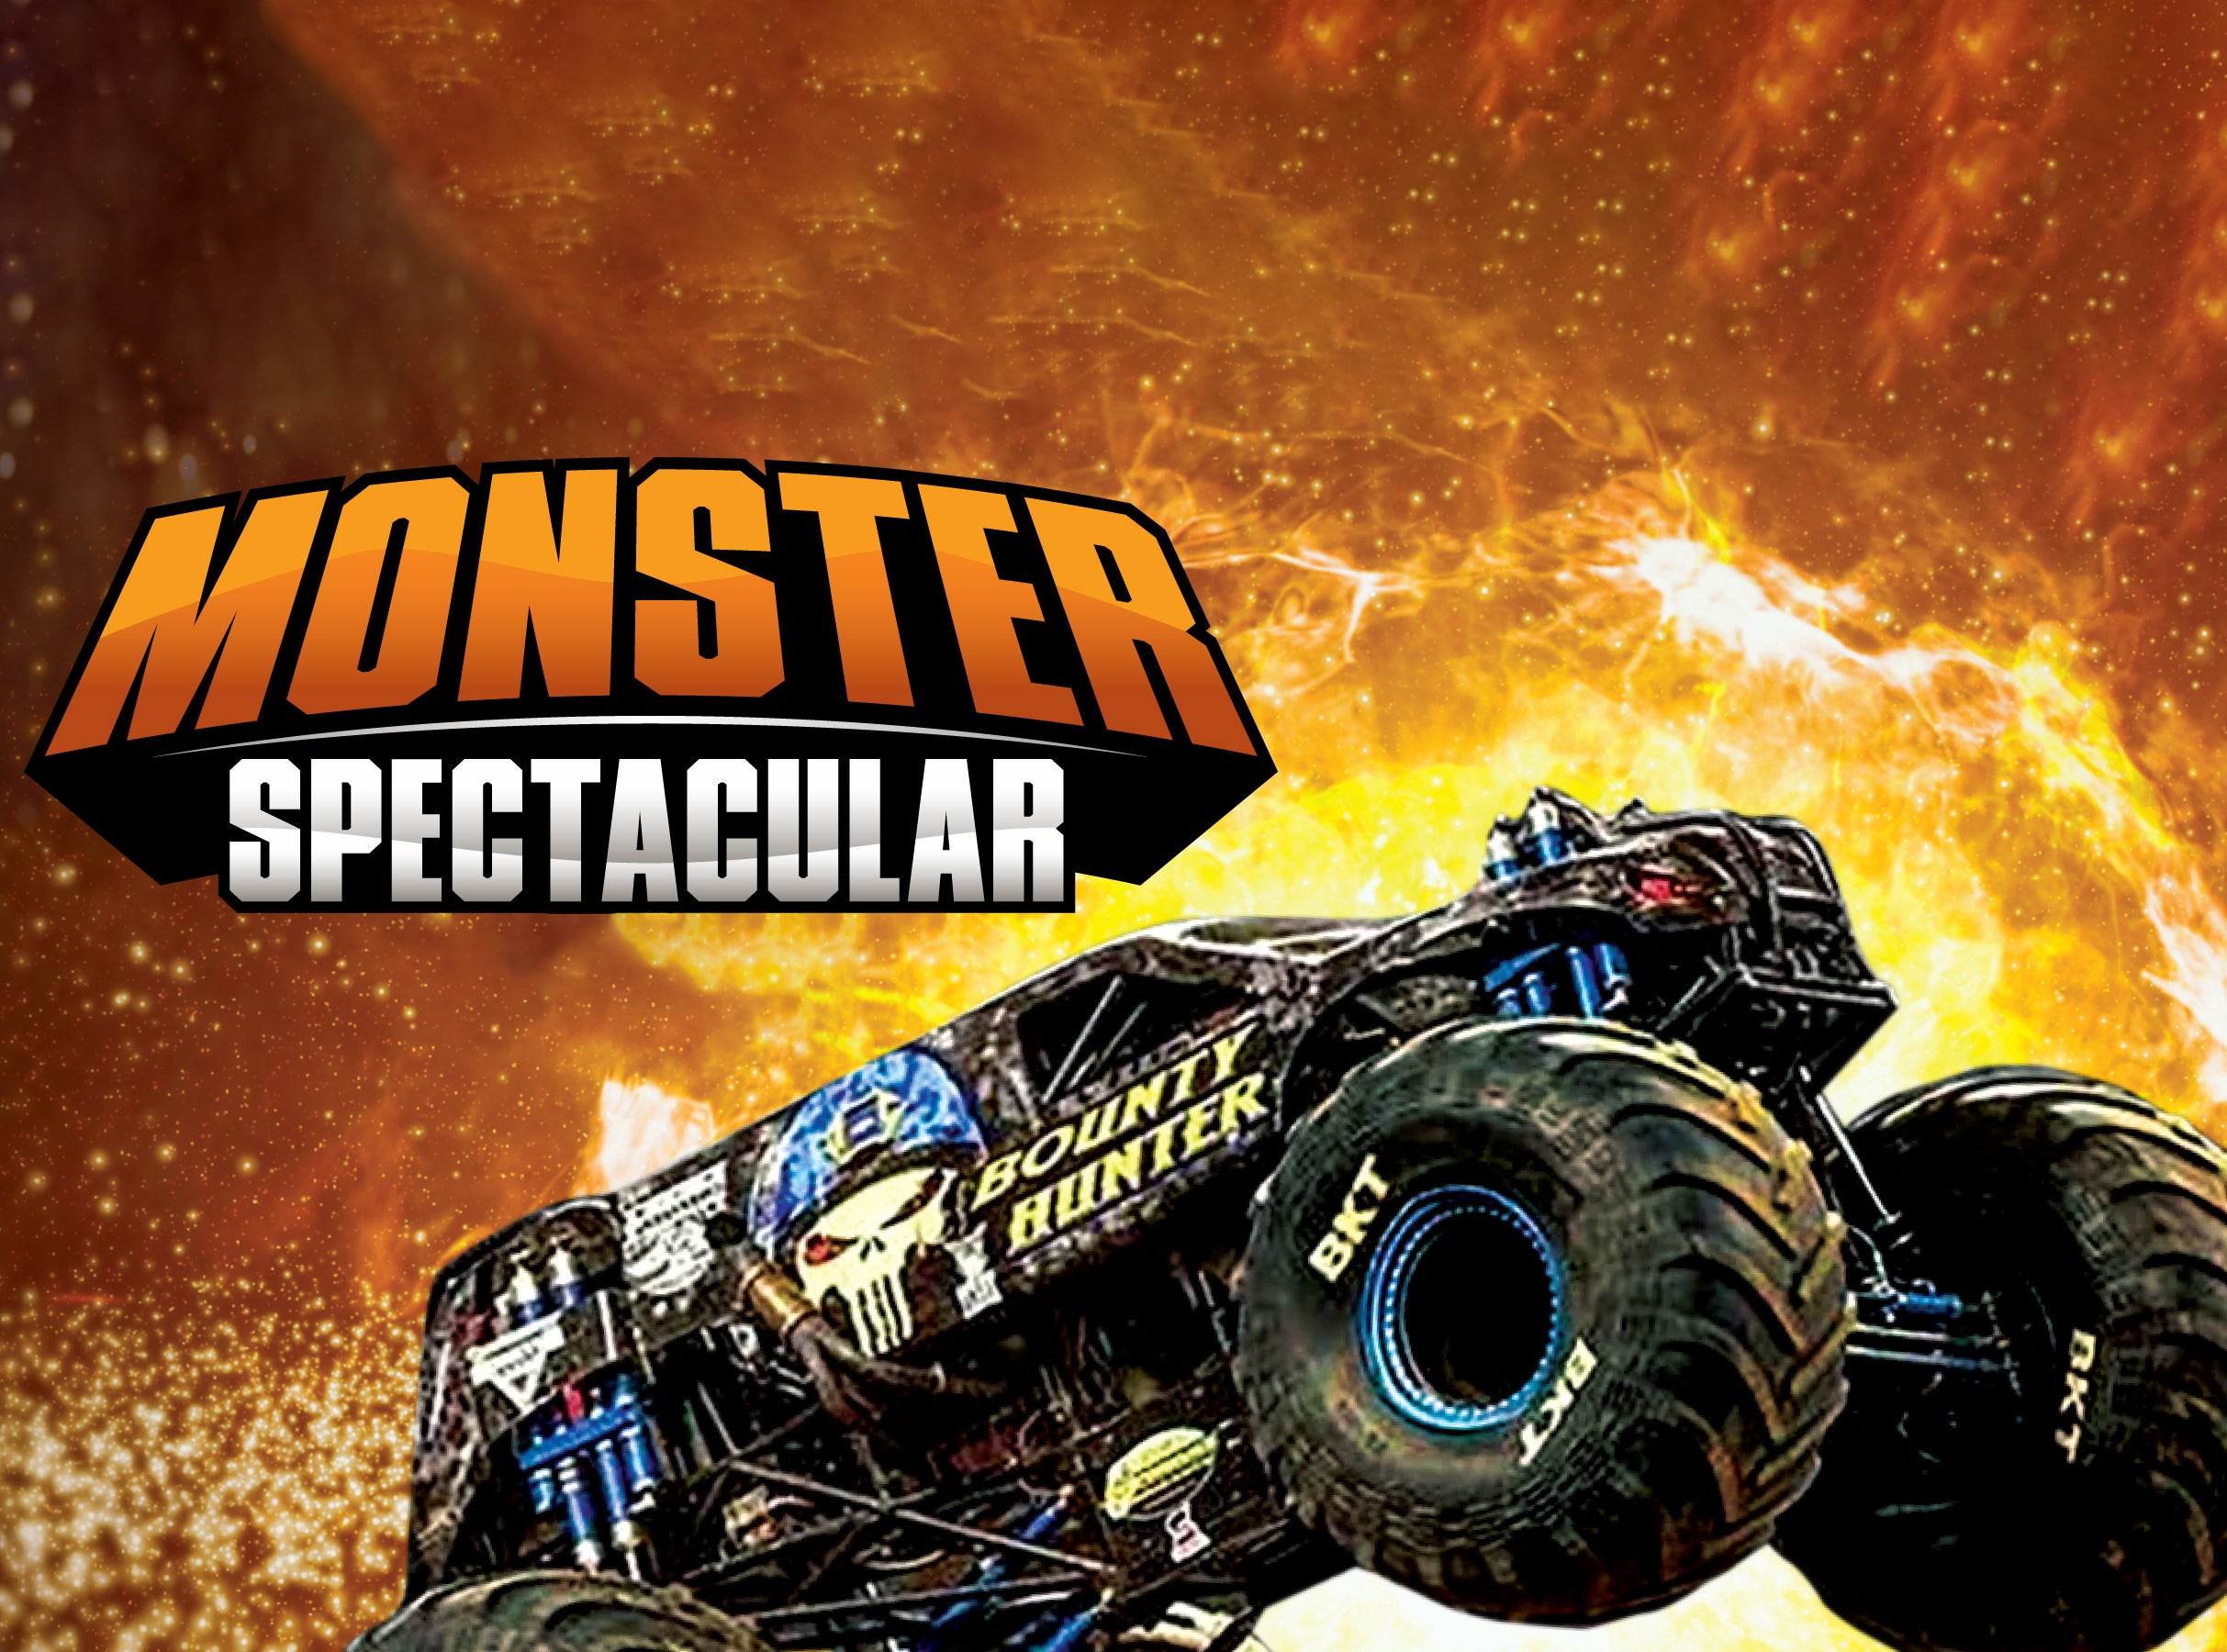 Monster Spectacular presale c0de for performance tickets in Kanata, ON (Canadian Tire Centre)